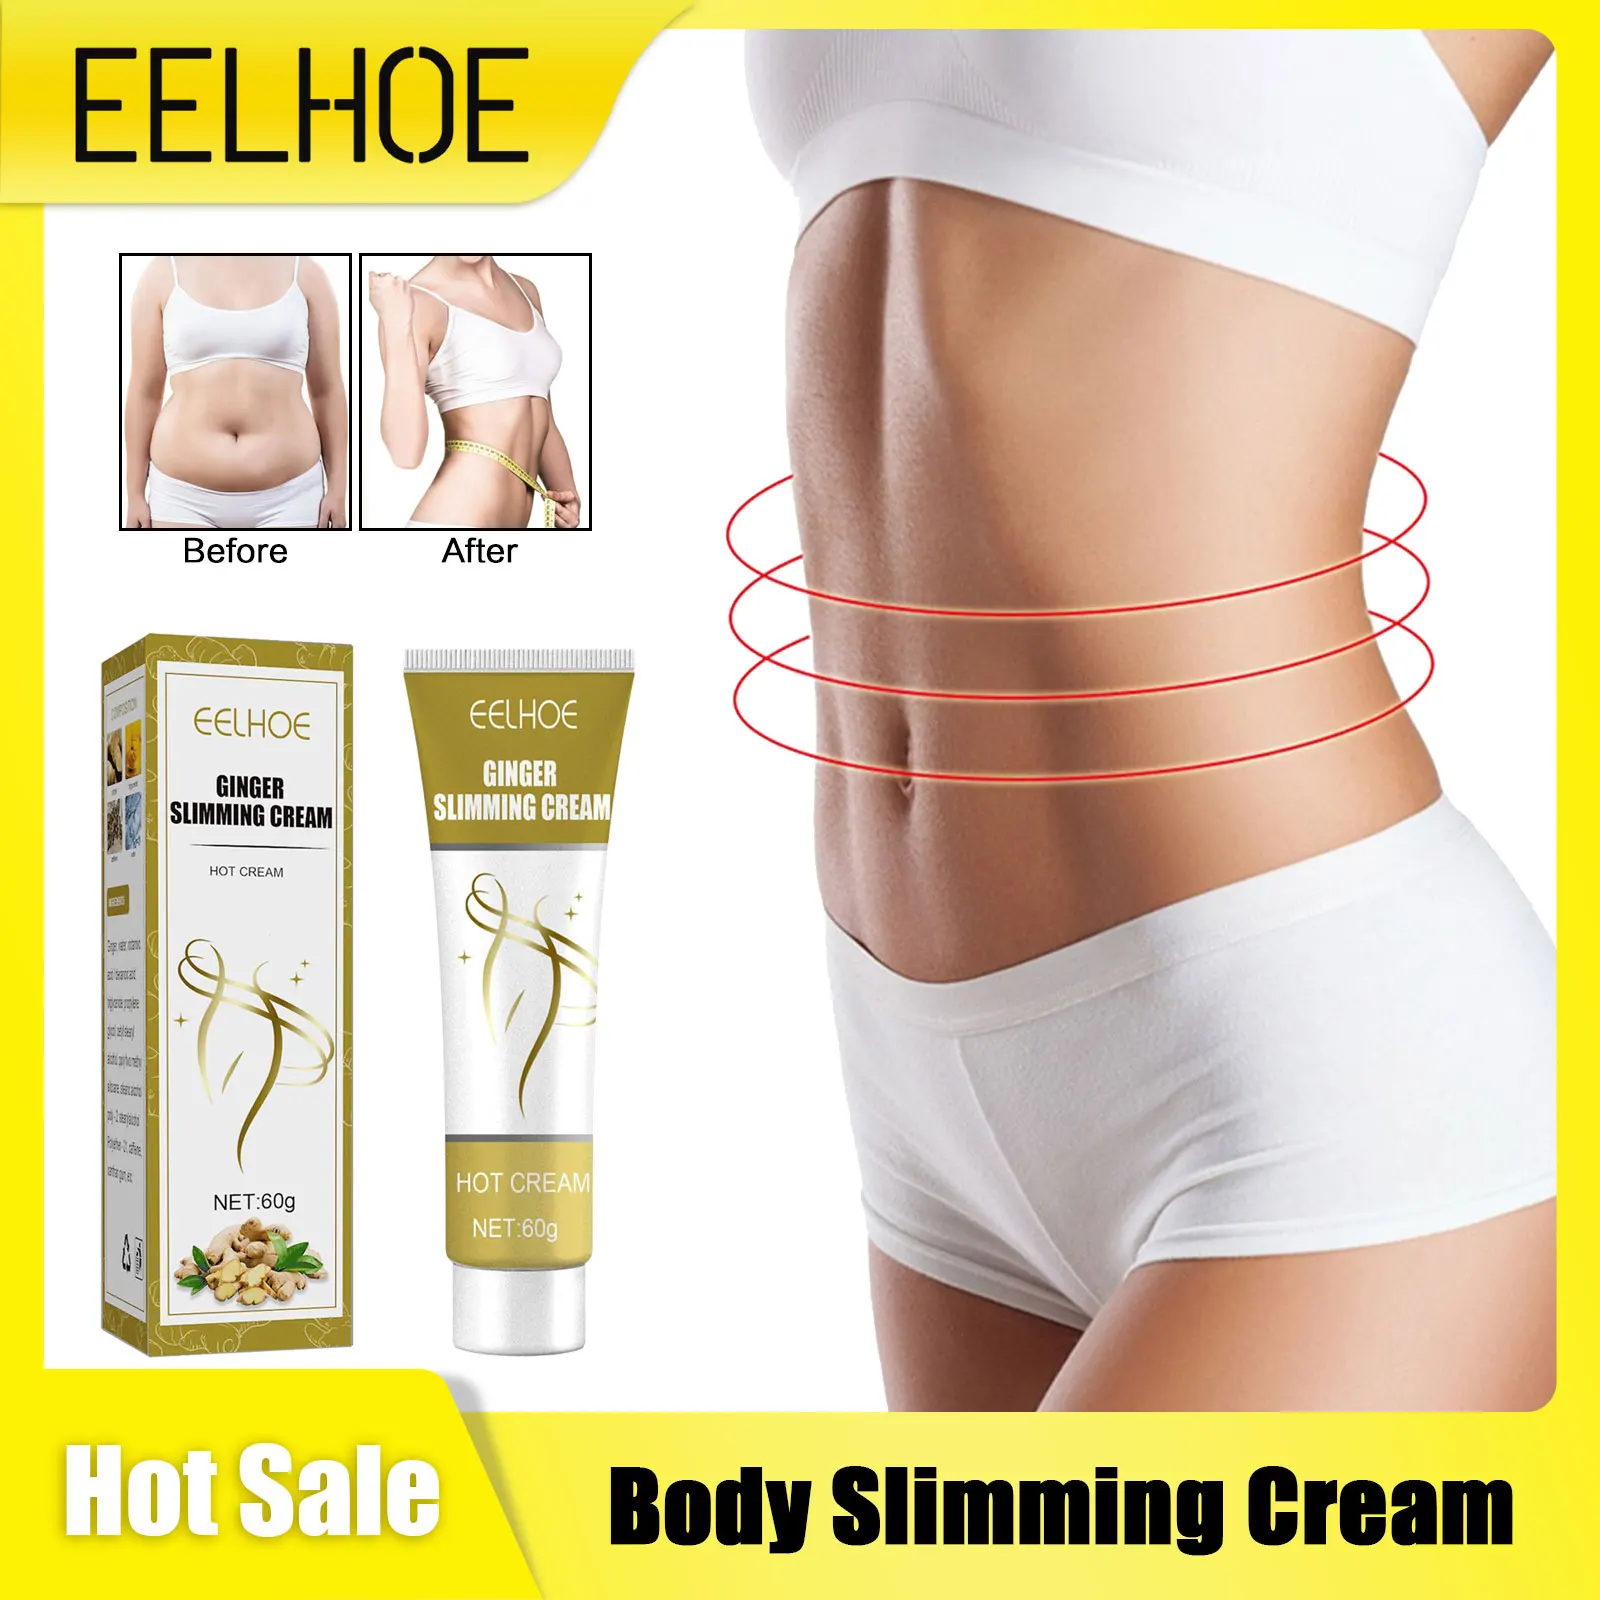 

Body Firming Cream Anti Cellulite Weight Loss Promotes Fat Burning Tightening Belly Curve Slimming Thigh Shaping Massage Cream